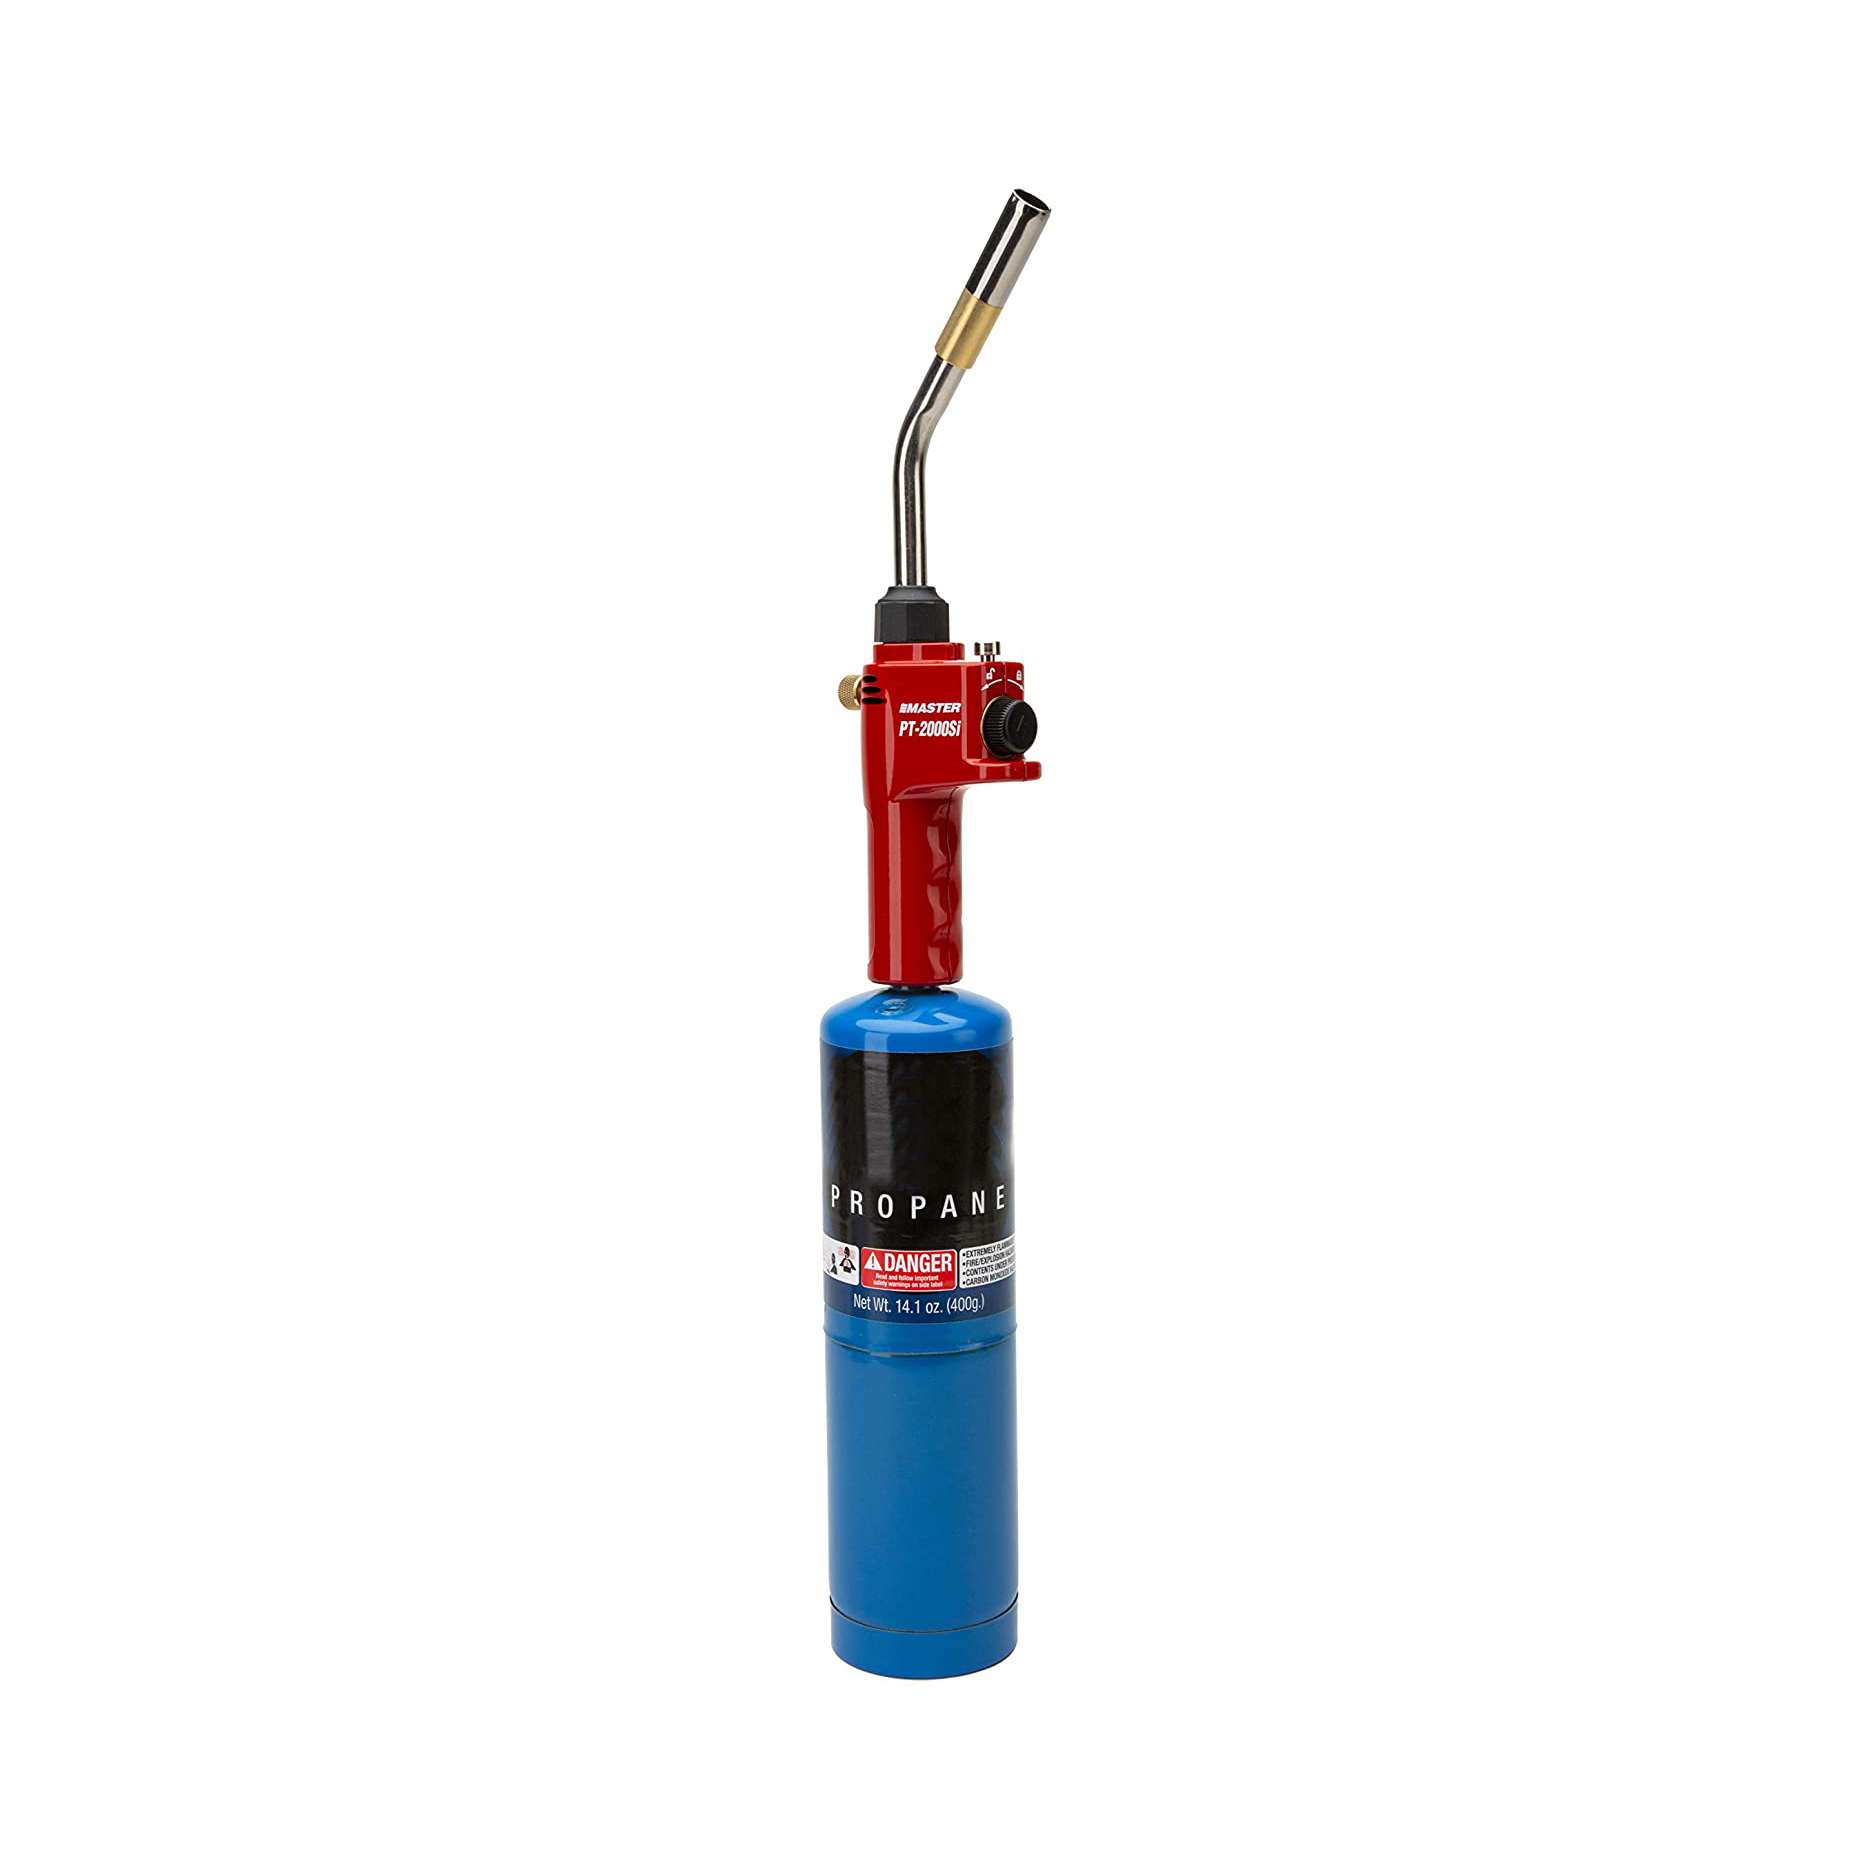 Windproof Mini Blow Torch with Continuous Flame Lock Urban Blowtorch